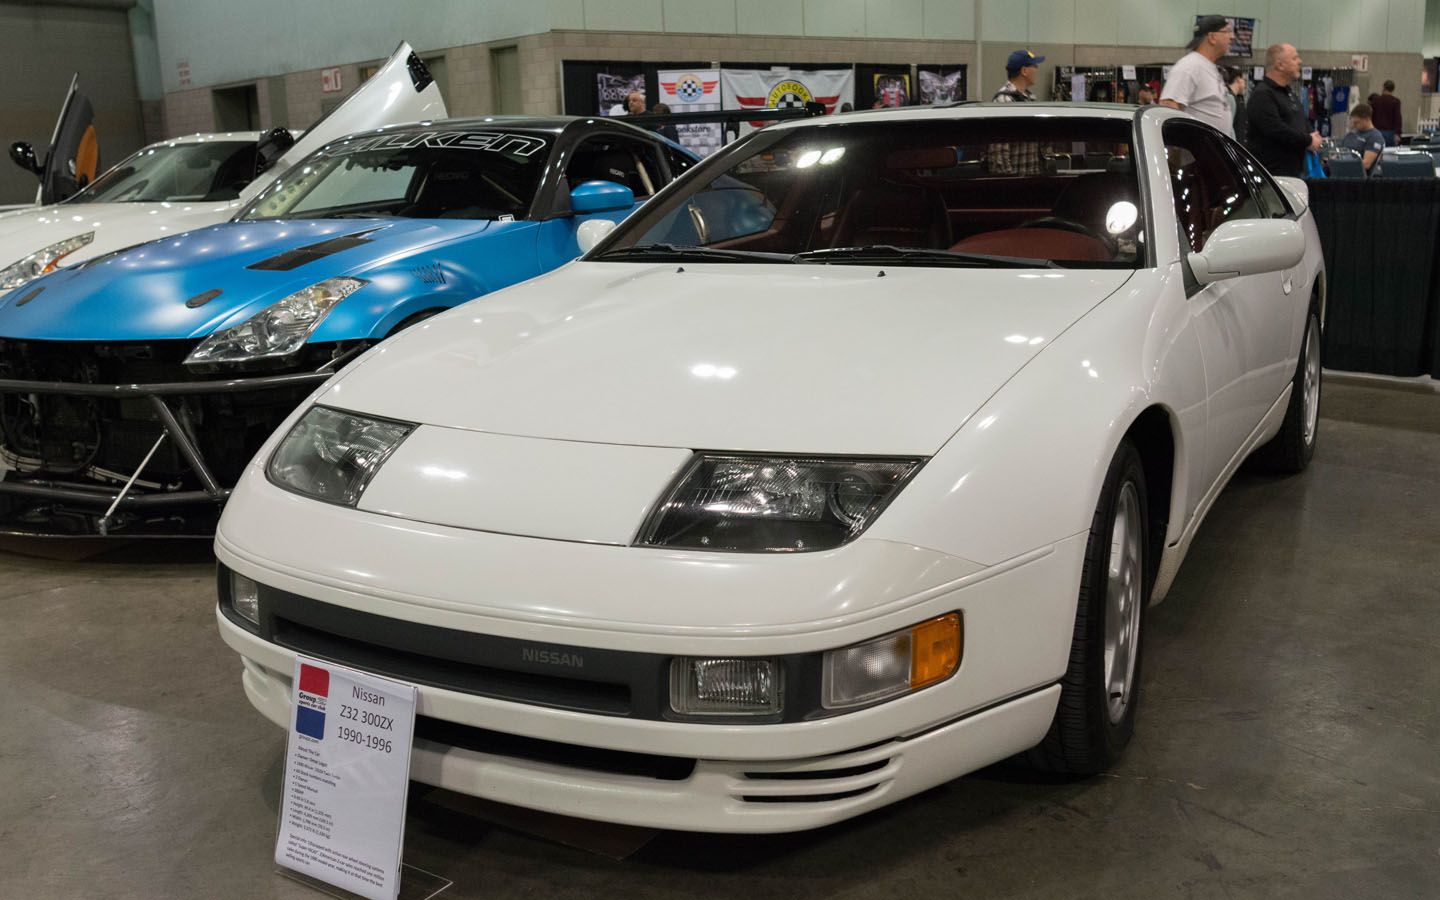 white nissan300ZX on display